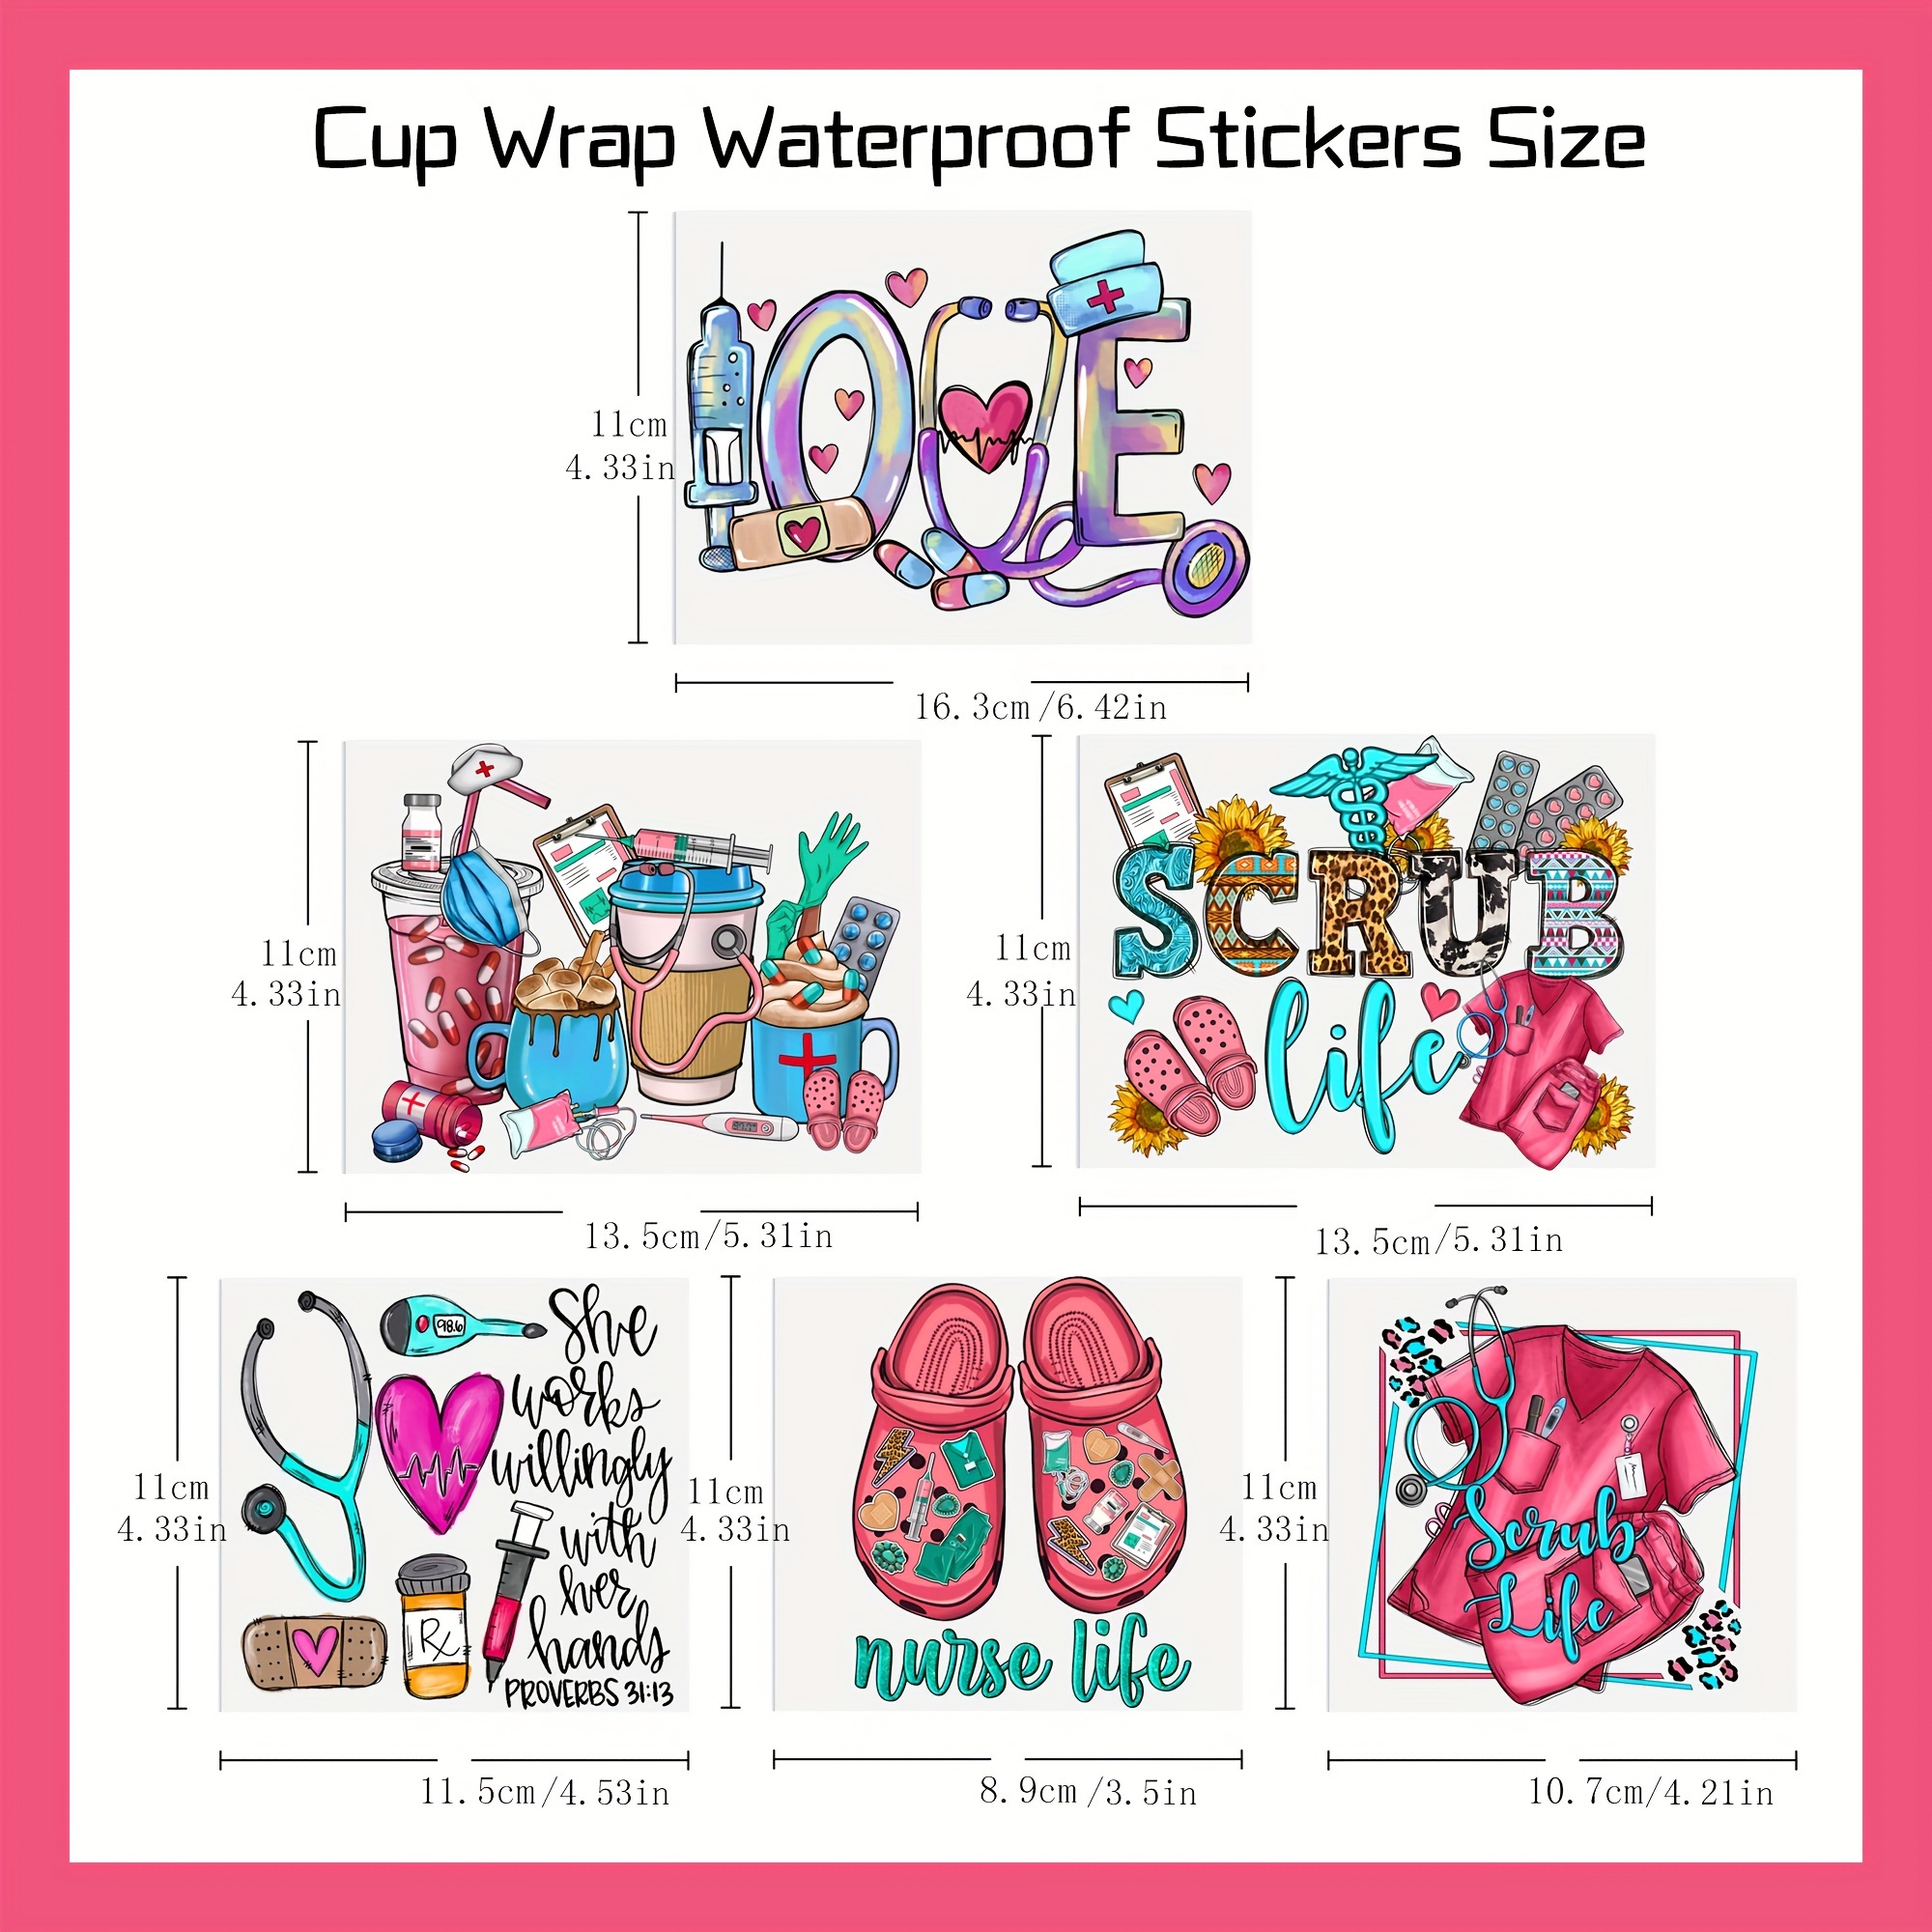  UV DTF Waterproof Cup Wrap Transfer Variety Pack That Includes  Wraps. for 16 oz Libbey Glass Tumblers and Other Hard Surfaces (Sports  Pack) : Arts, Crafts & Sewing